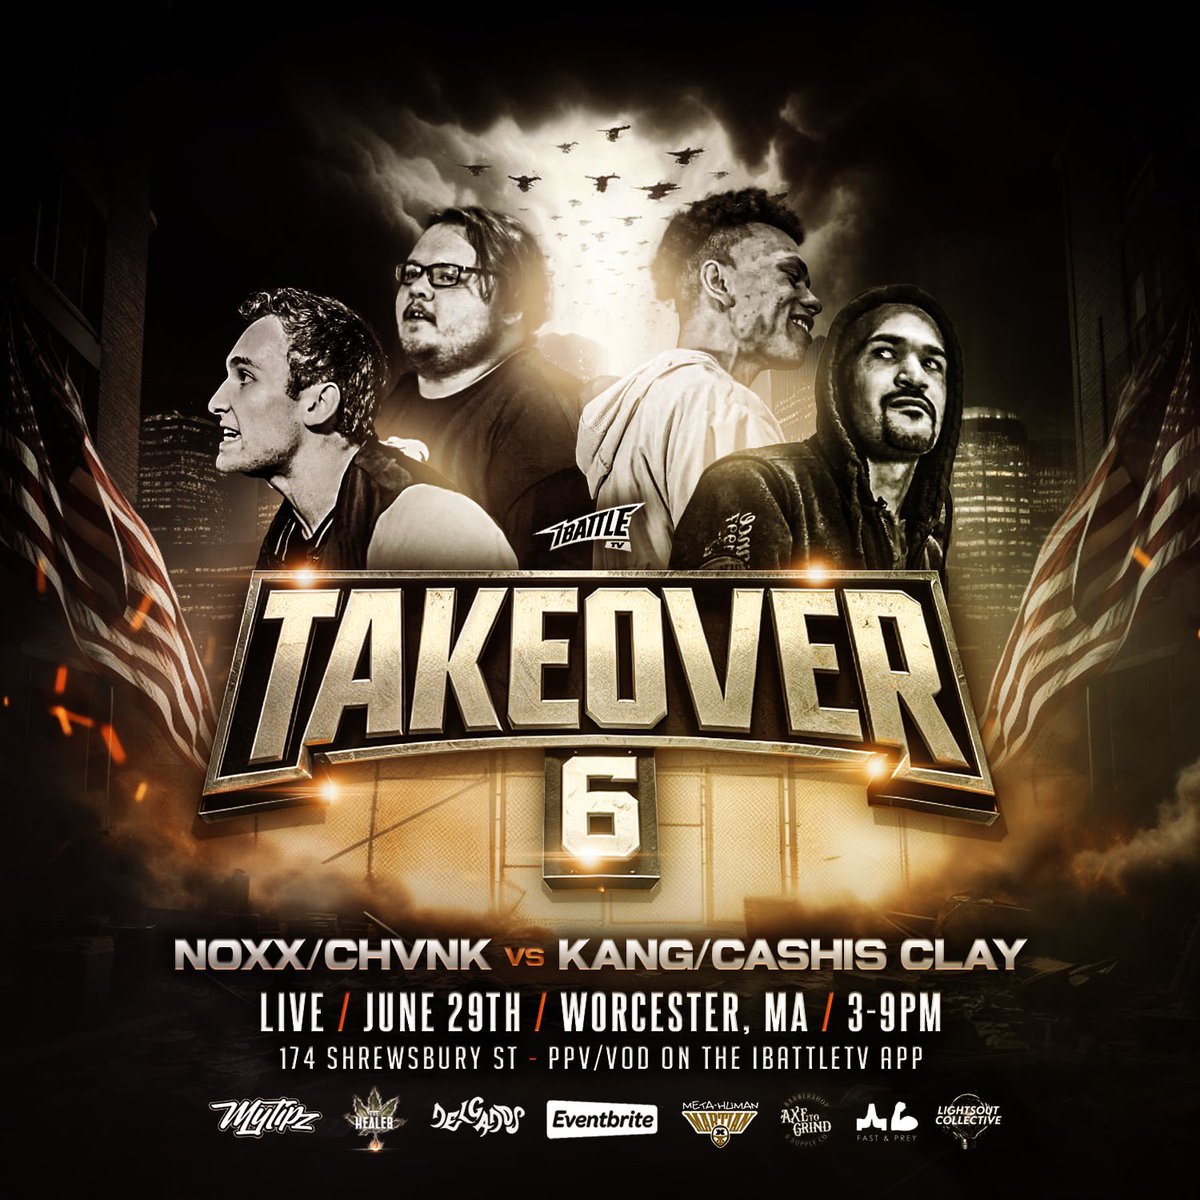 June 29th #TAKEOVER6
Worcester, MA

Announcement #4 - 
@noxxbattler & @Chvnk30s vs @kang_person & @CashisClayGold 

+ REAL SIKH vs CITYY TOWERS
FEBOU vs OPPA
CJA vs E FARRELL
& MORE TBA

Streaming only on iBattleTV.
Tickets available on eventbrite.